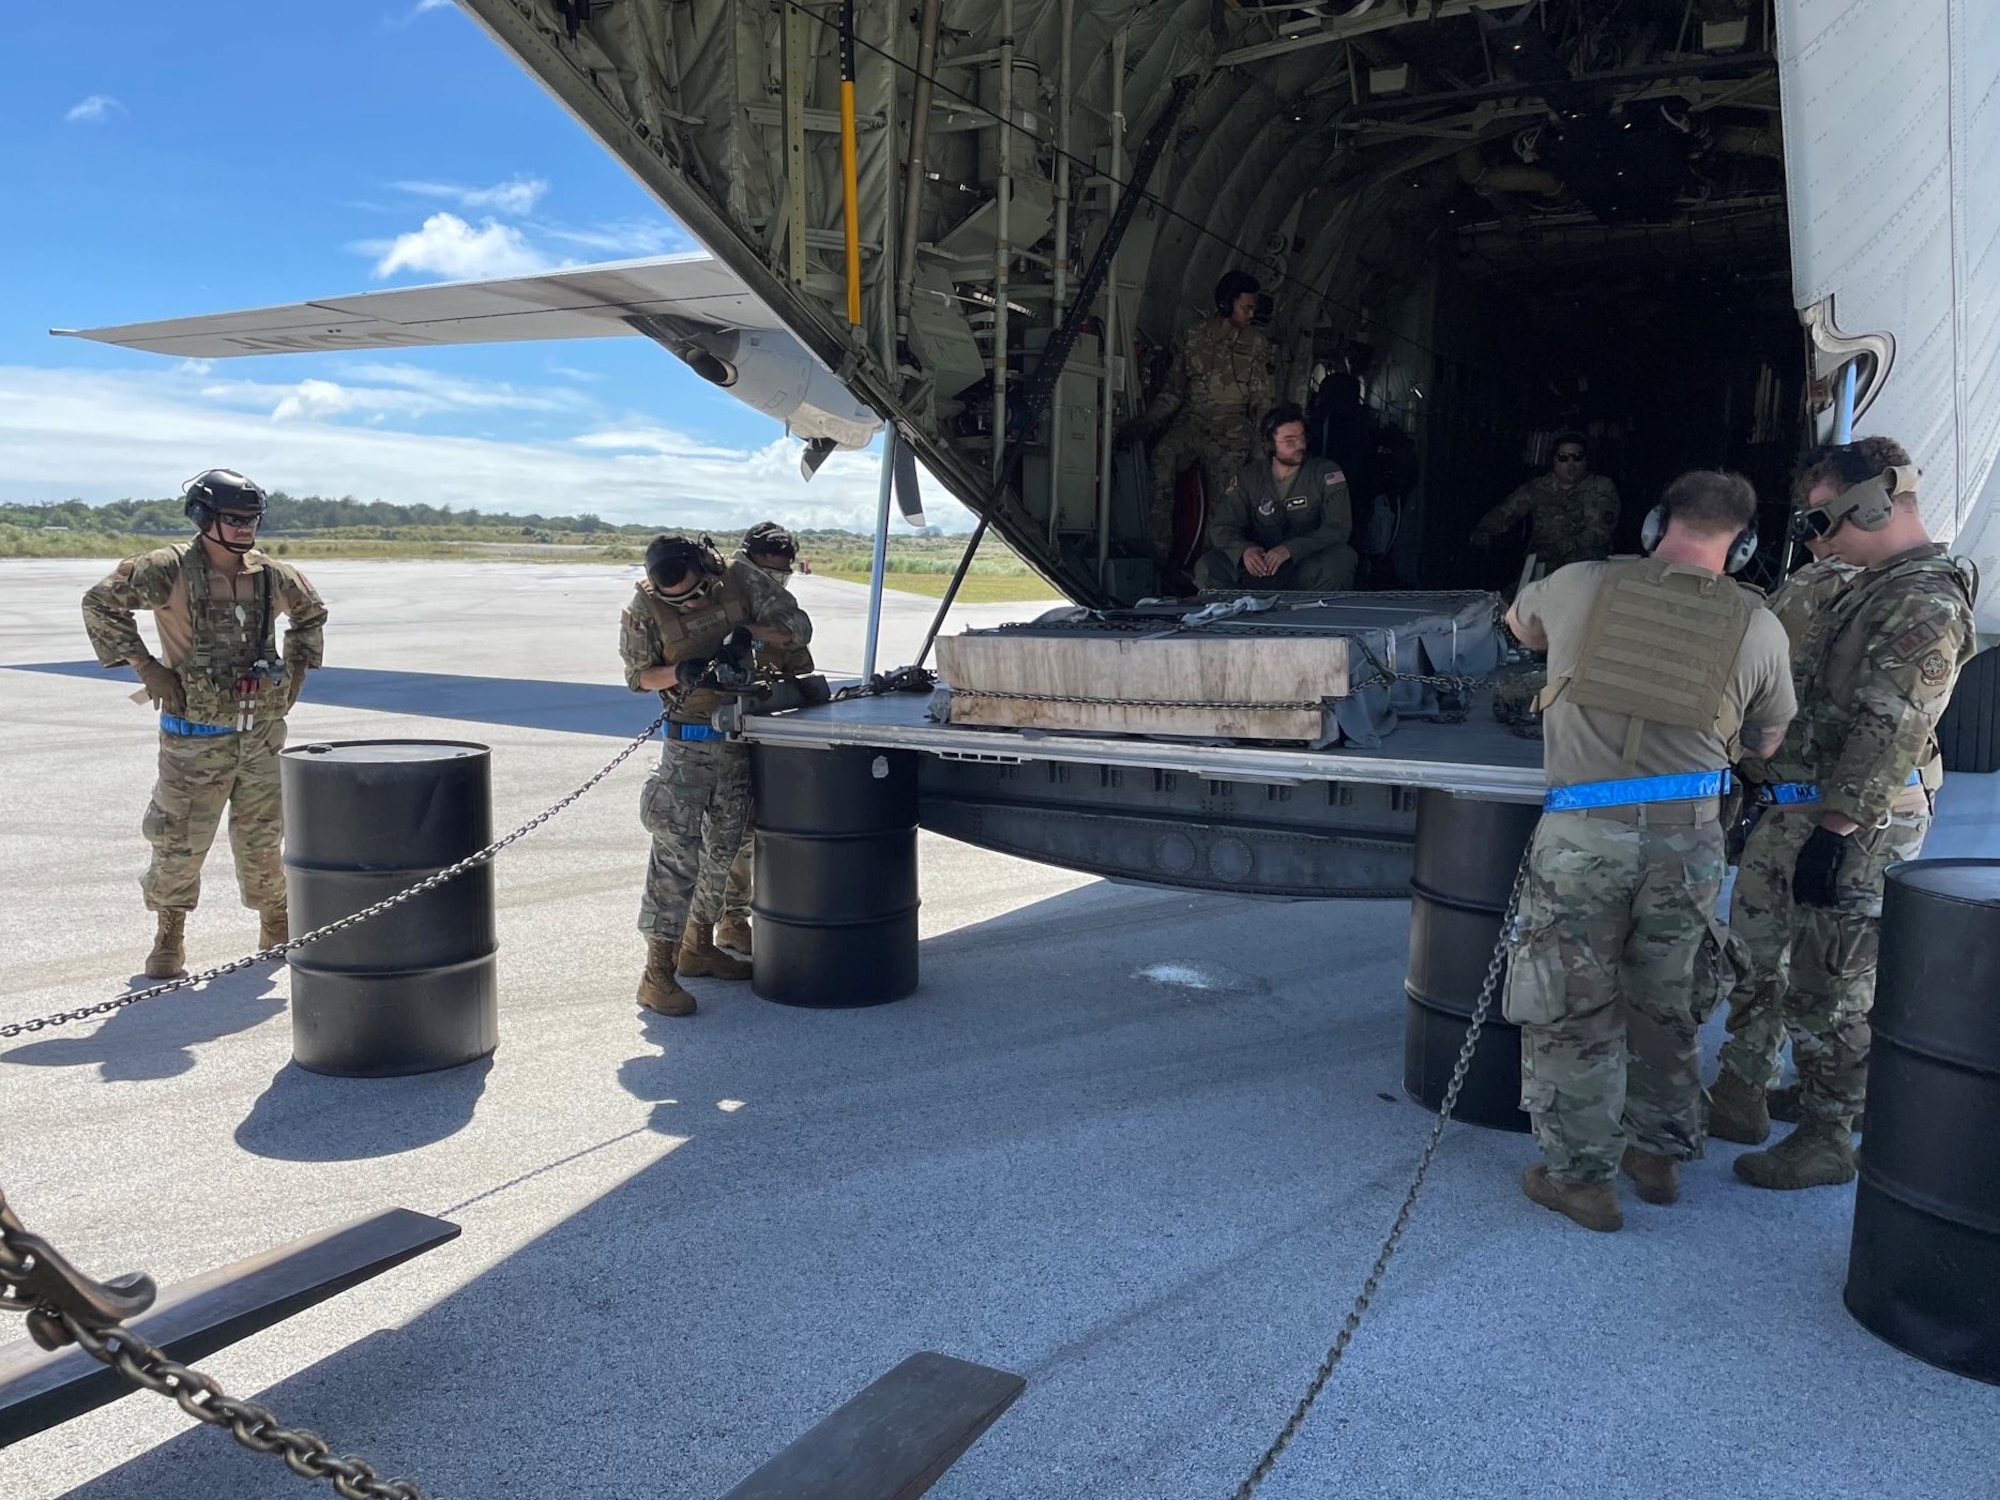 Six airmen offload cargo by hand from an airplane